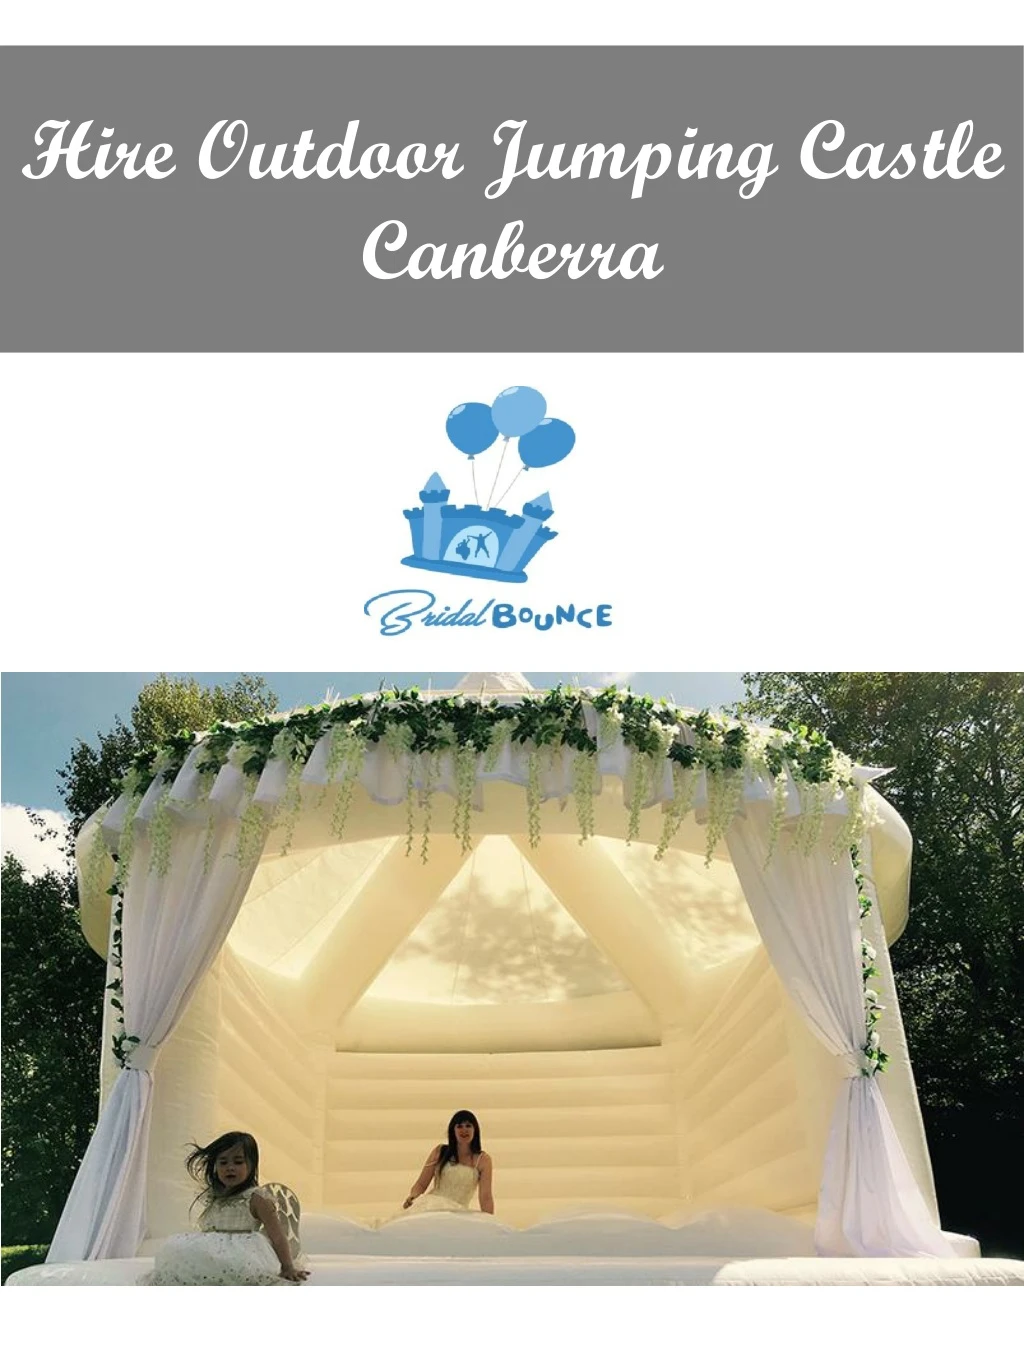 hire outdoor jumping castle canberra